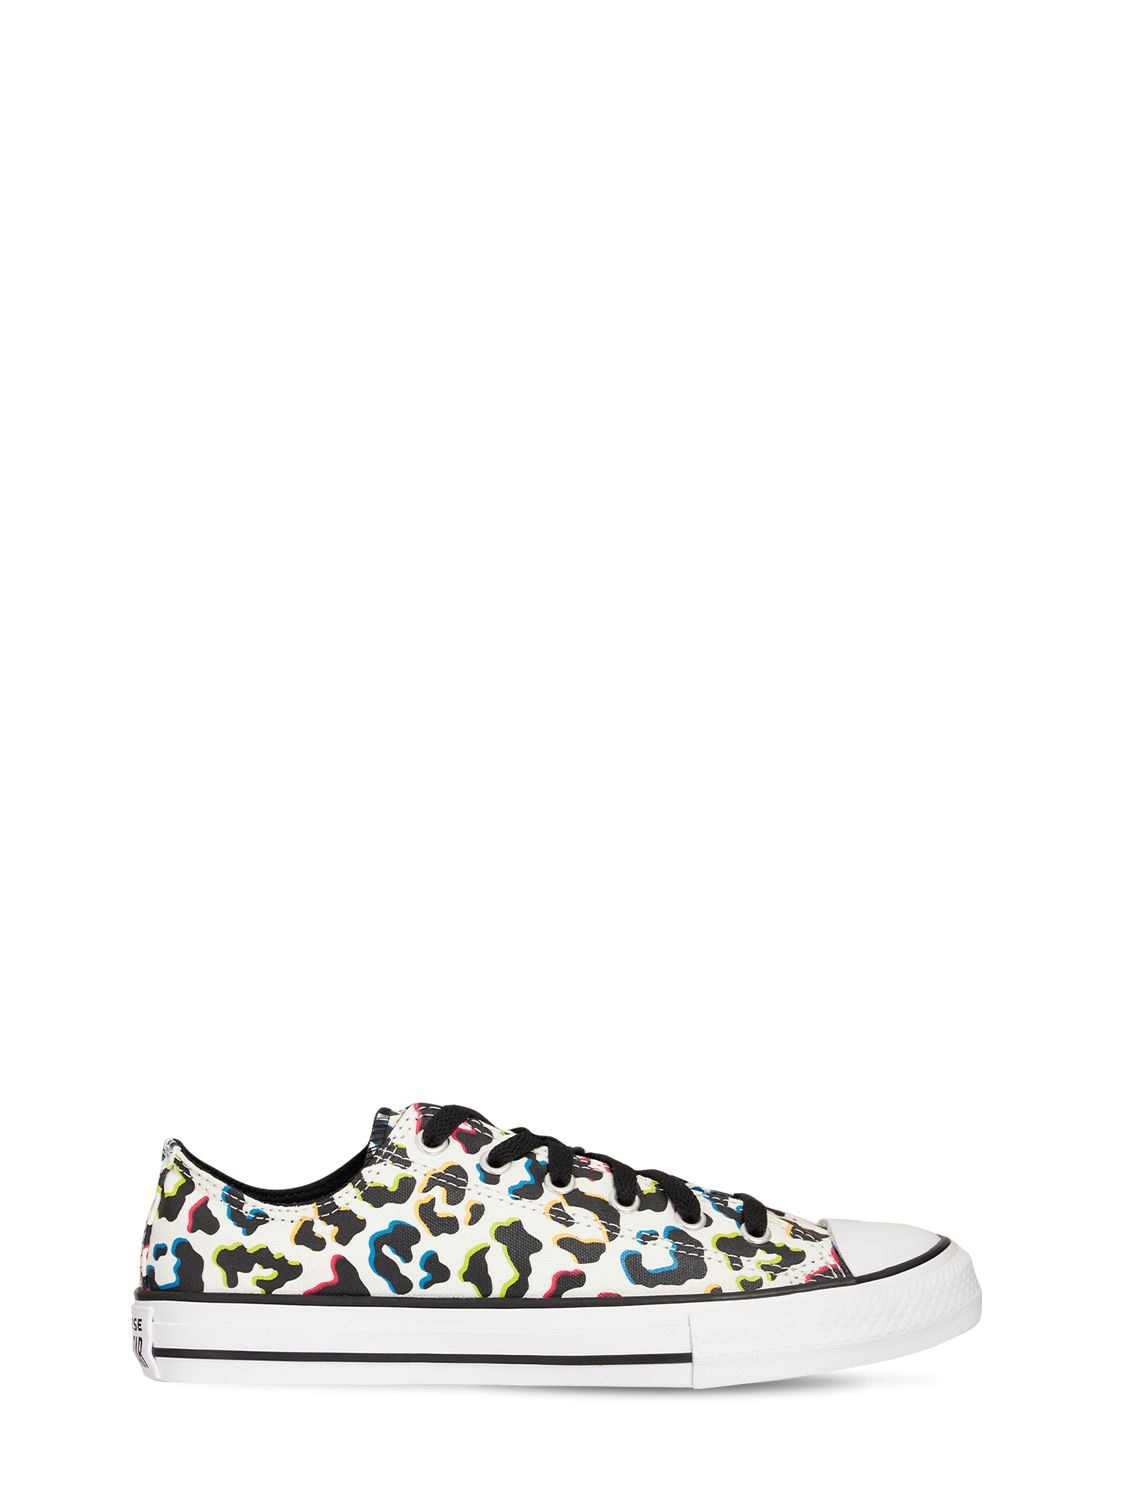 Converse Kids' Leo Print Chuck Taylor All Star Sneakers In Multicolor ...